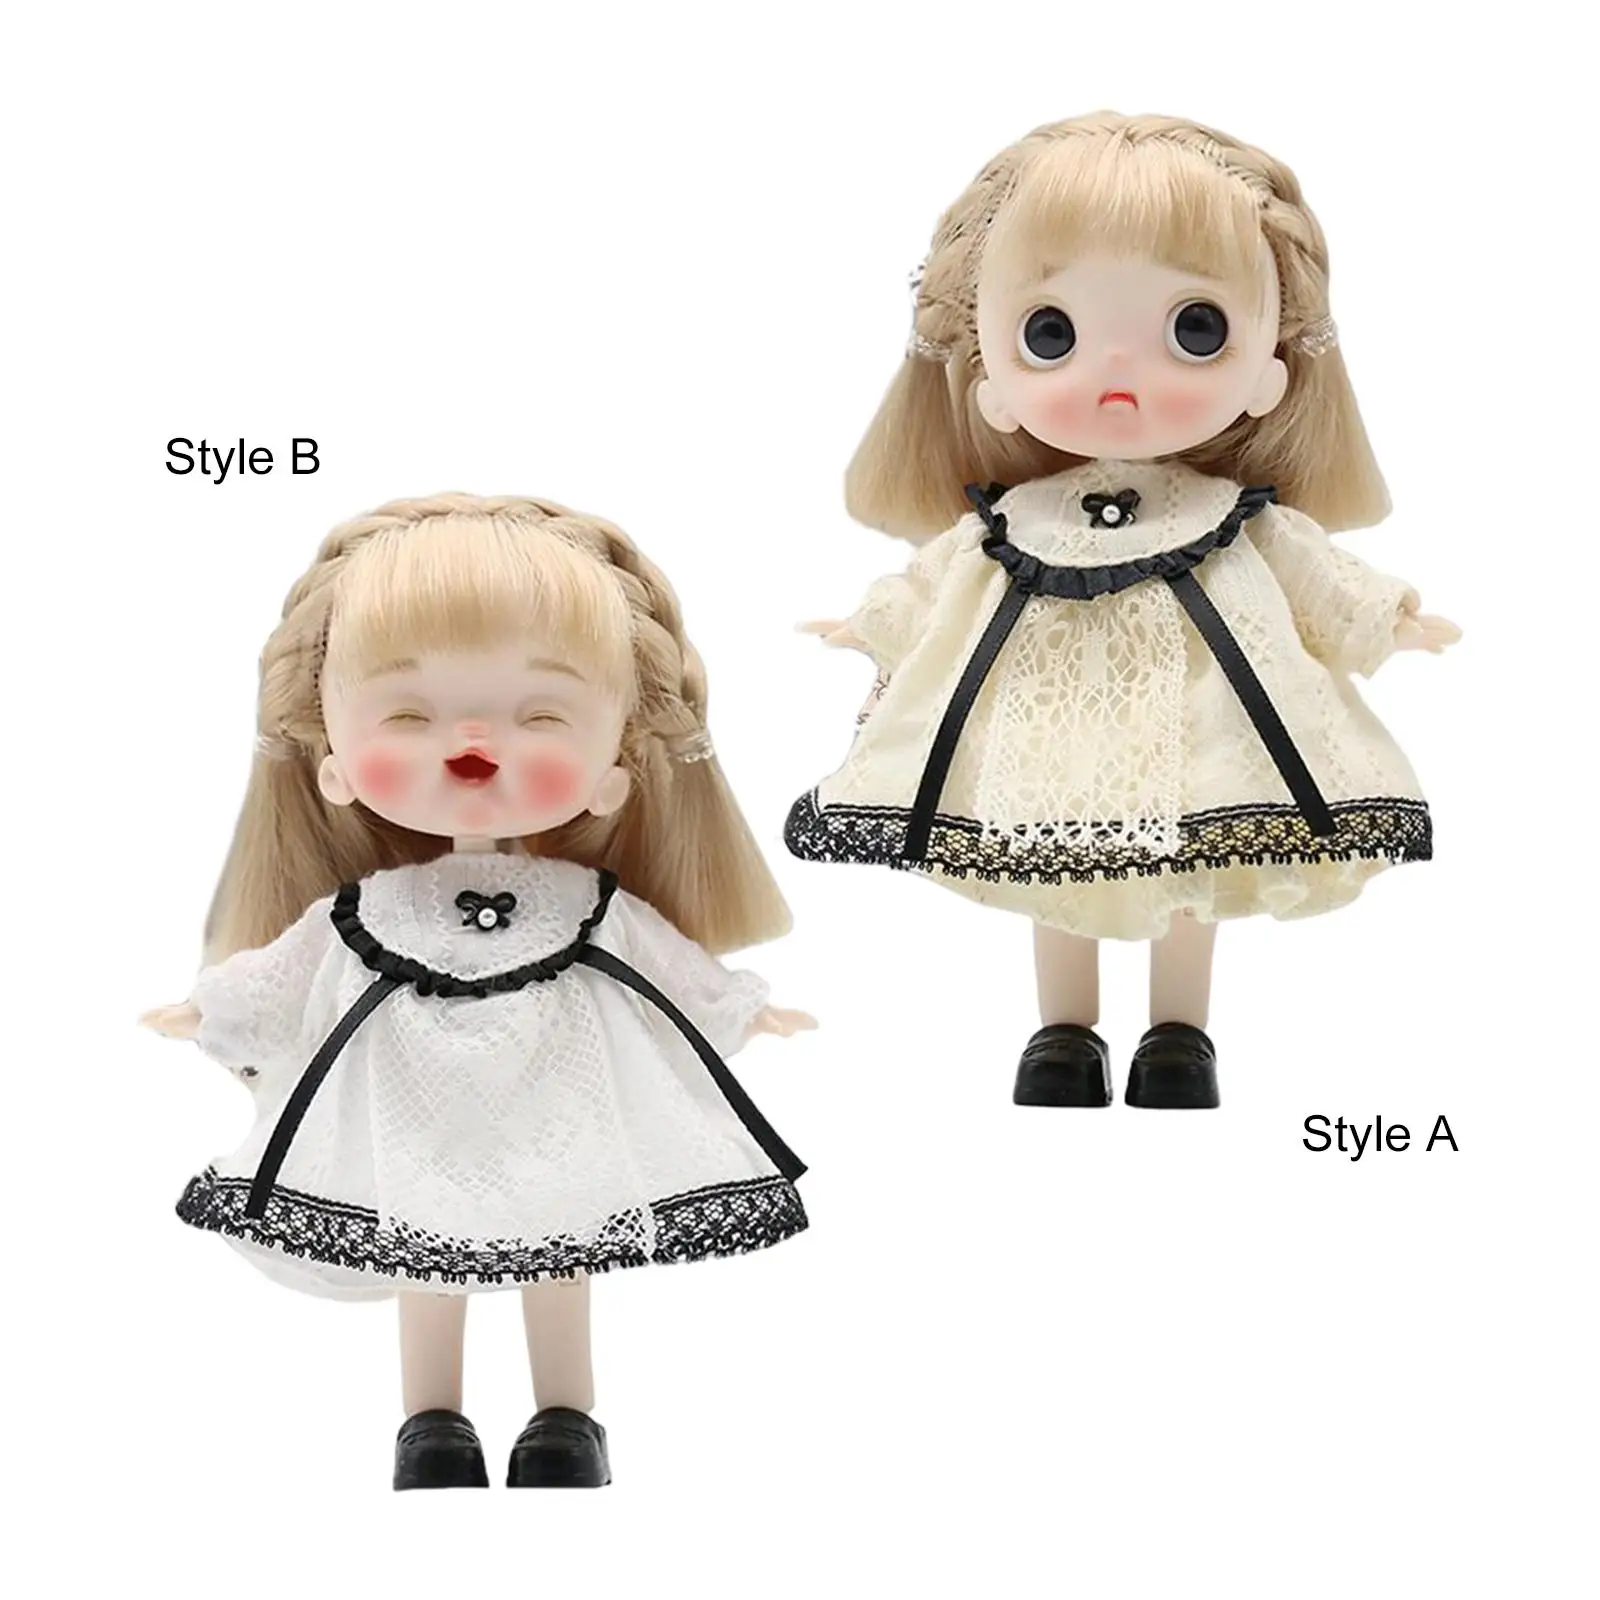 14cm Ball Joints Doll,Dress up Accessories,Kids Girls Toys,Bendable makeup Doll